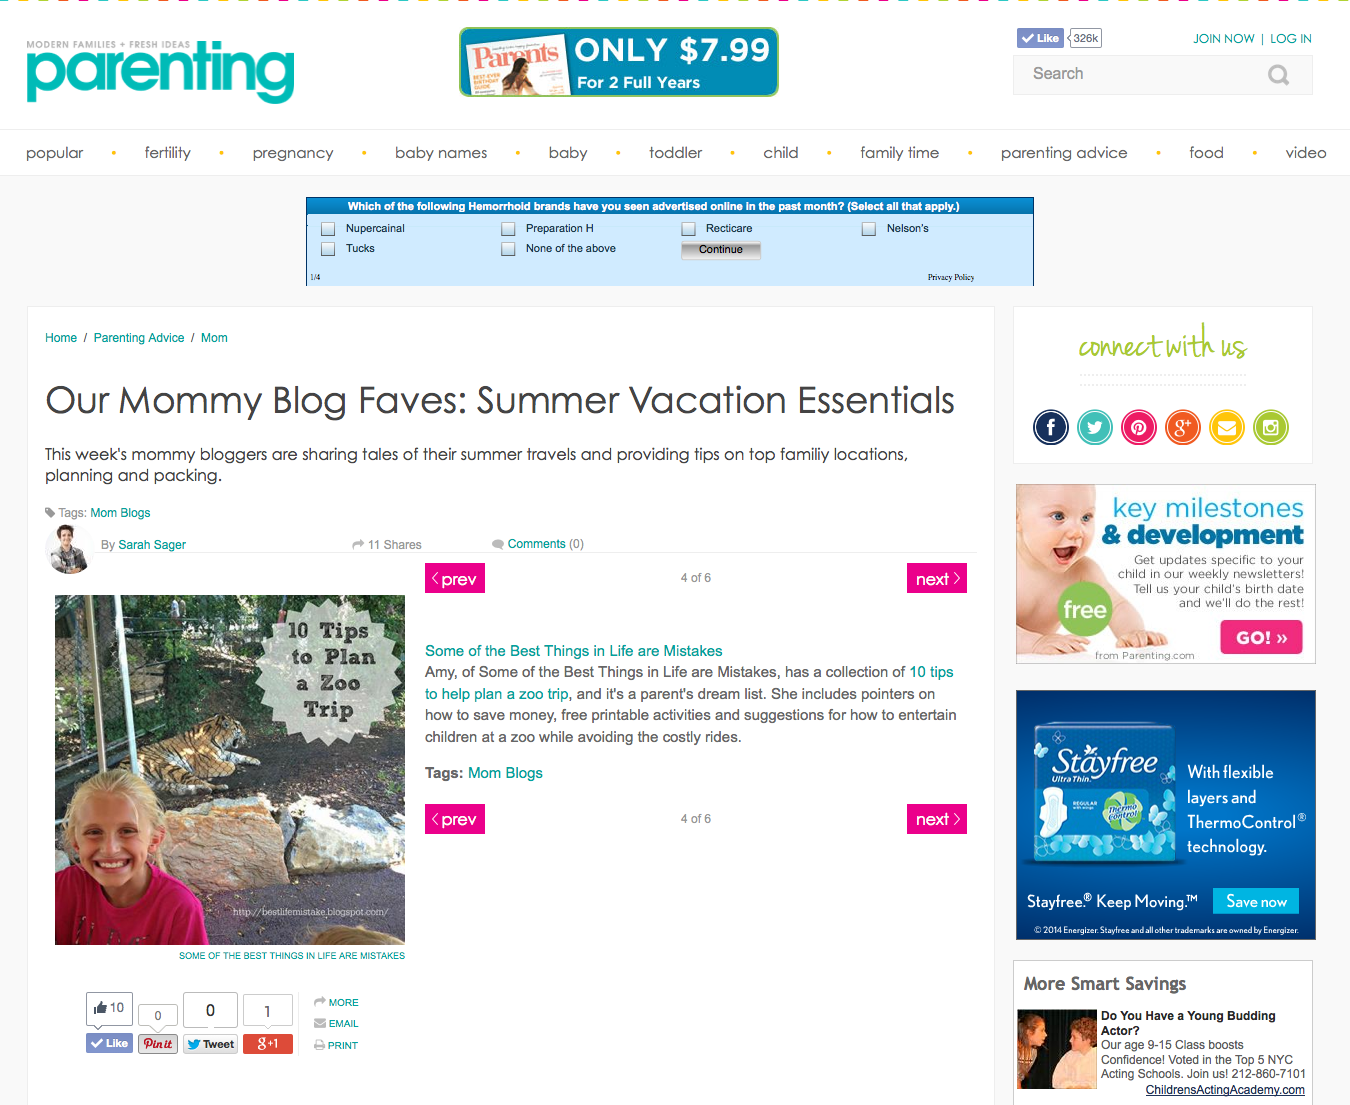 http://www.parenting.com/parenting-advice/mom/our-mommy-blog-faves-summer-vacation-essentials?page=3